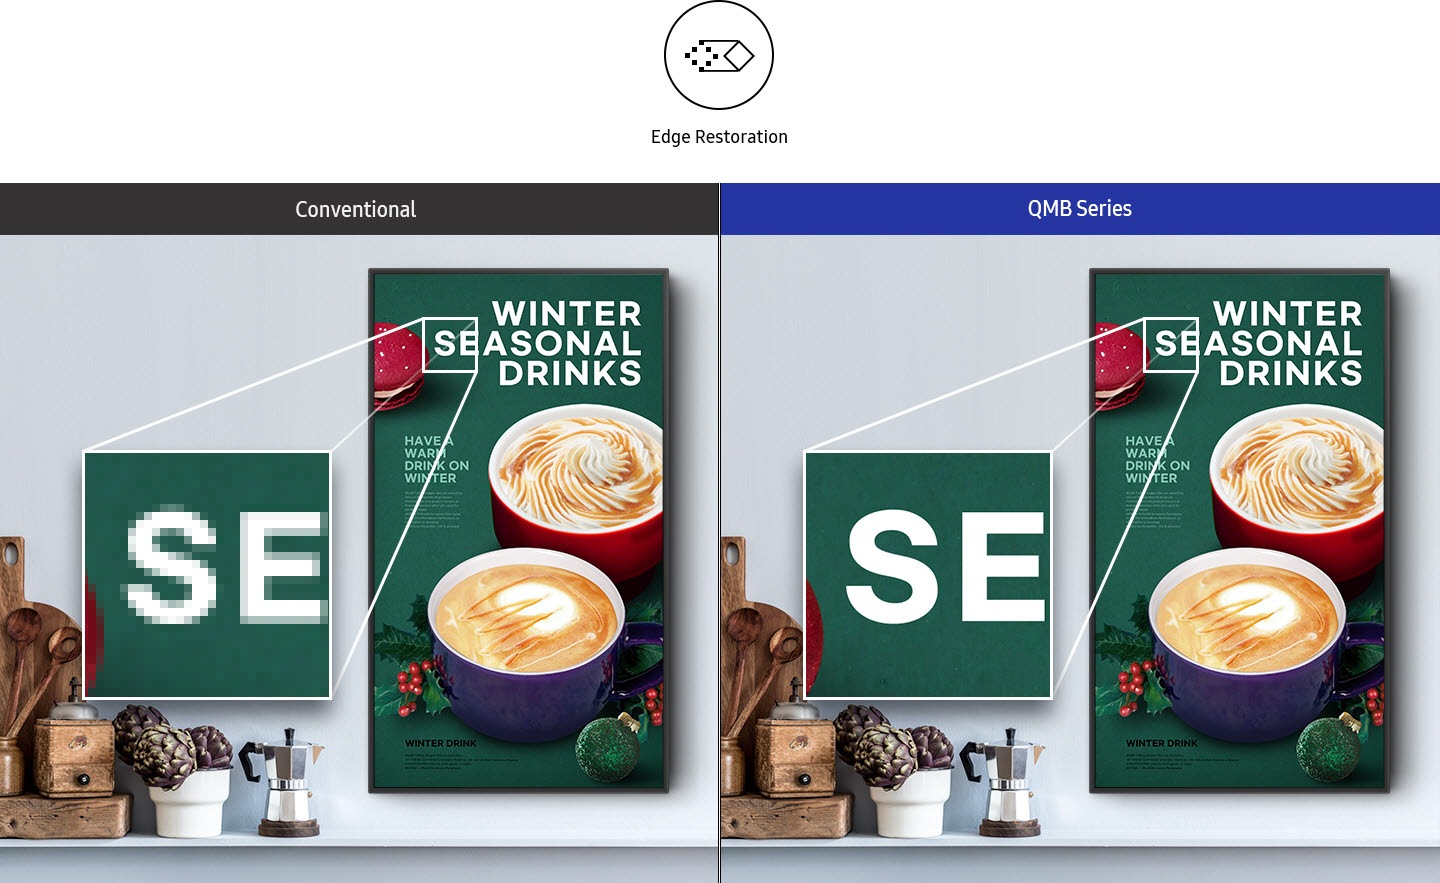 The screen reads WINTER SEASONAL DRINKS, and there are two drinks. In Conventional, the corners are broken when the SE part of the text on the screen is enlarged. In the QMB Series, the corners are naturally connected when the SE part of the screen text is enlarged. There is an edge restoration icon at the top.